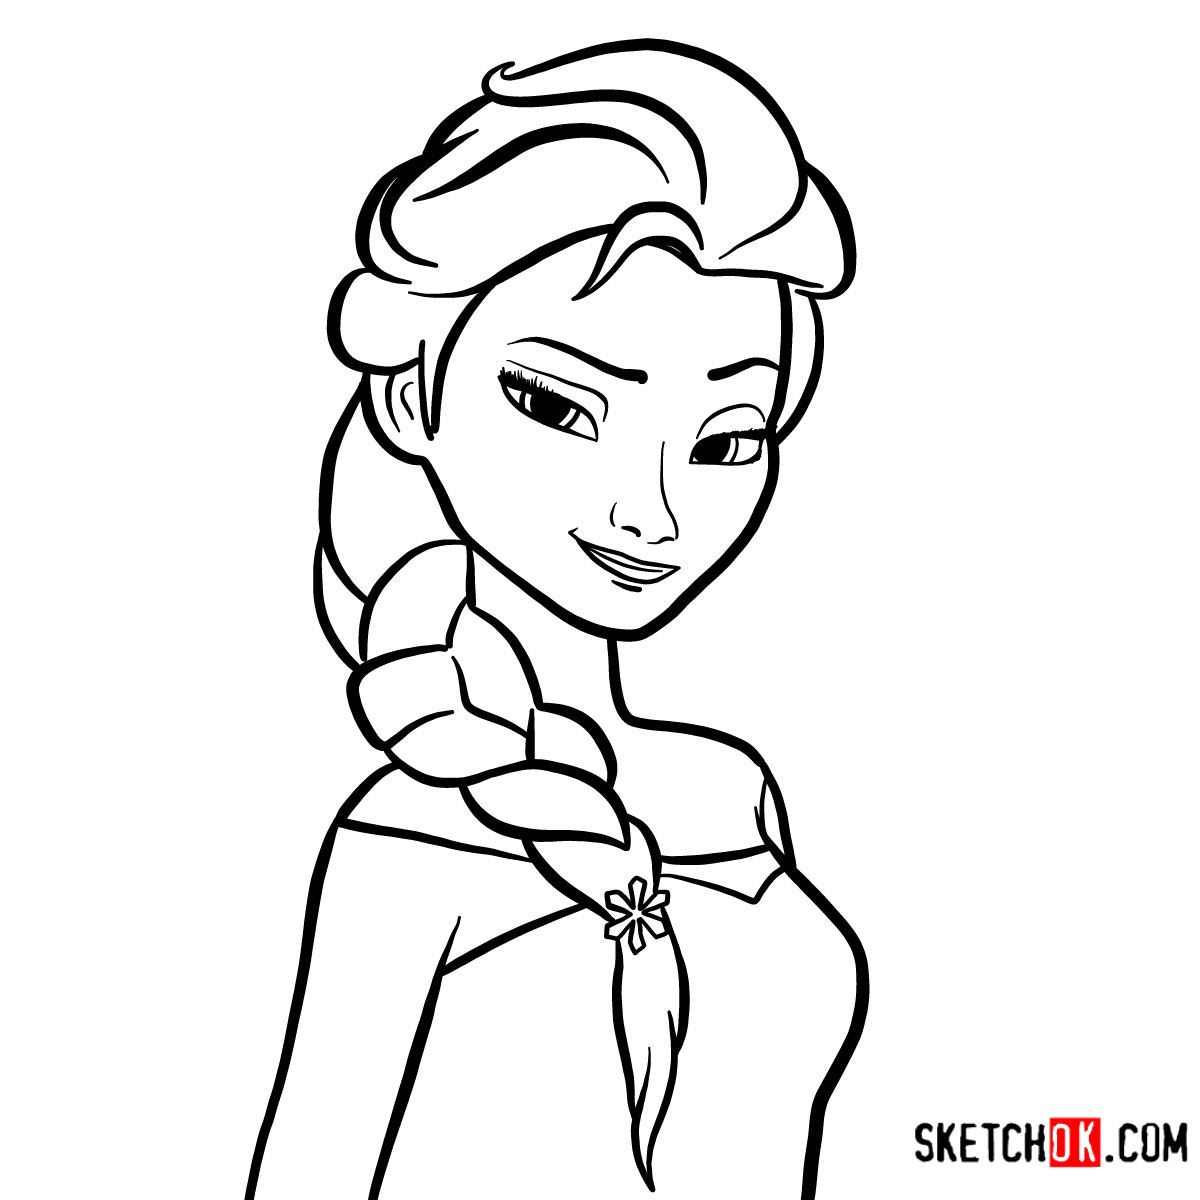 How to draw Princess Elsa's portrait | Frozen - Sketchok easy drawing guides